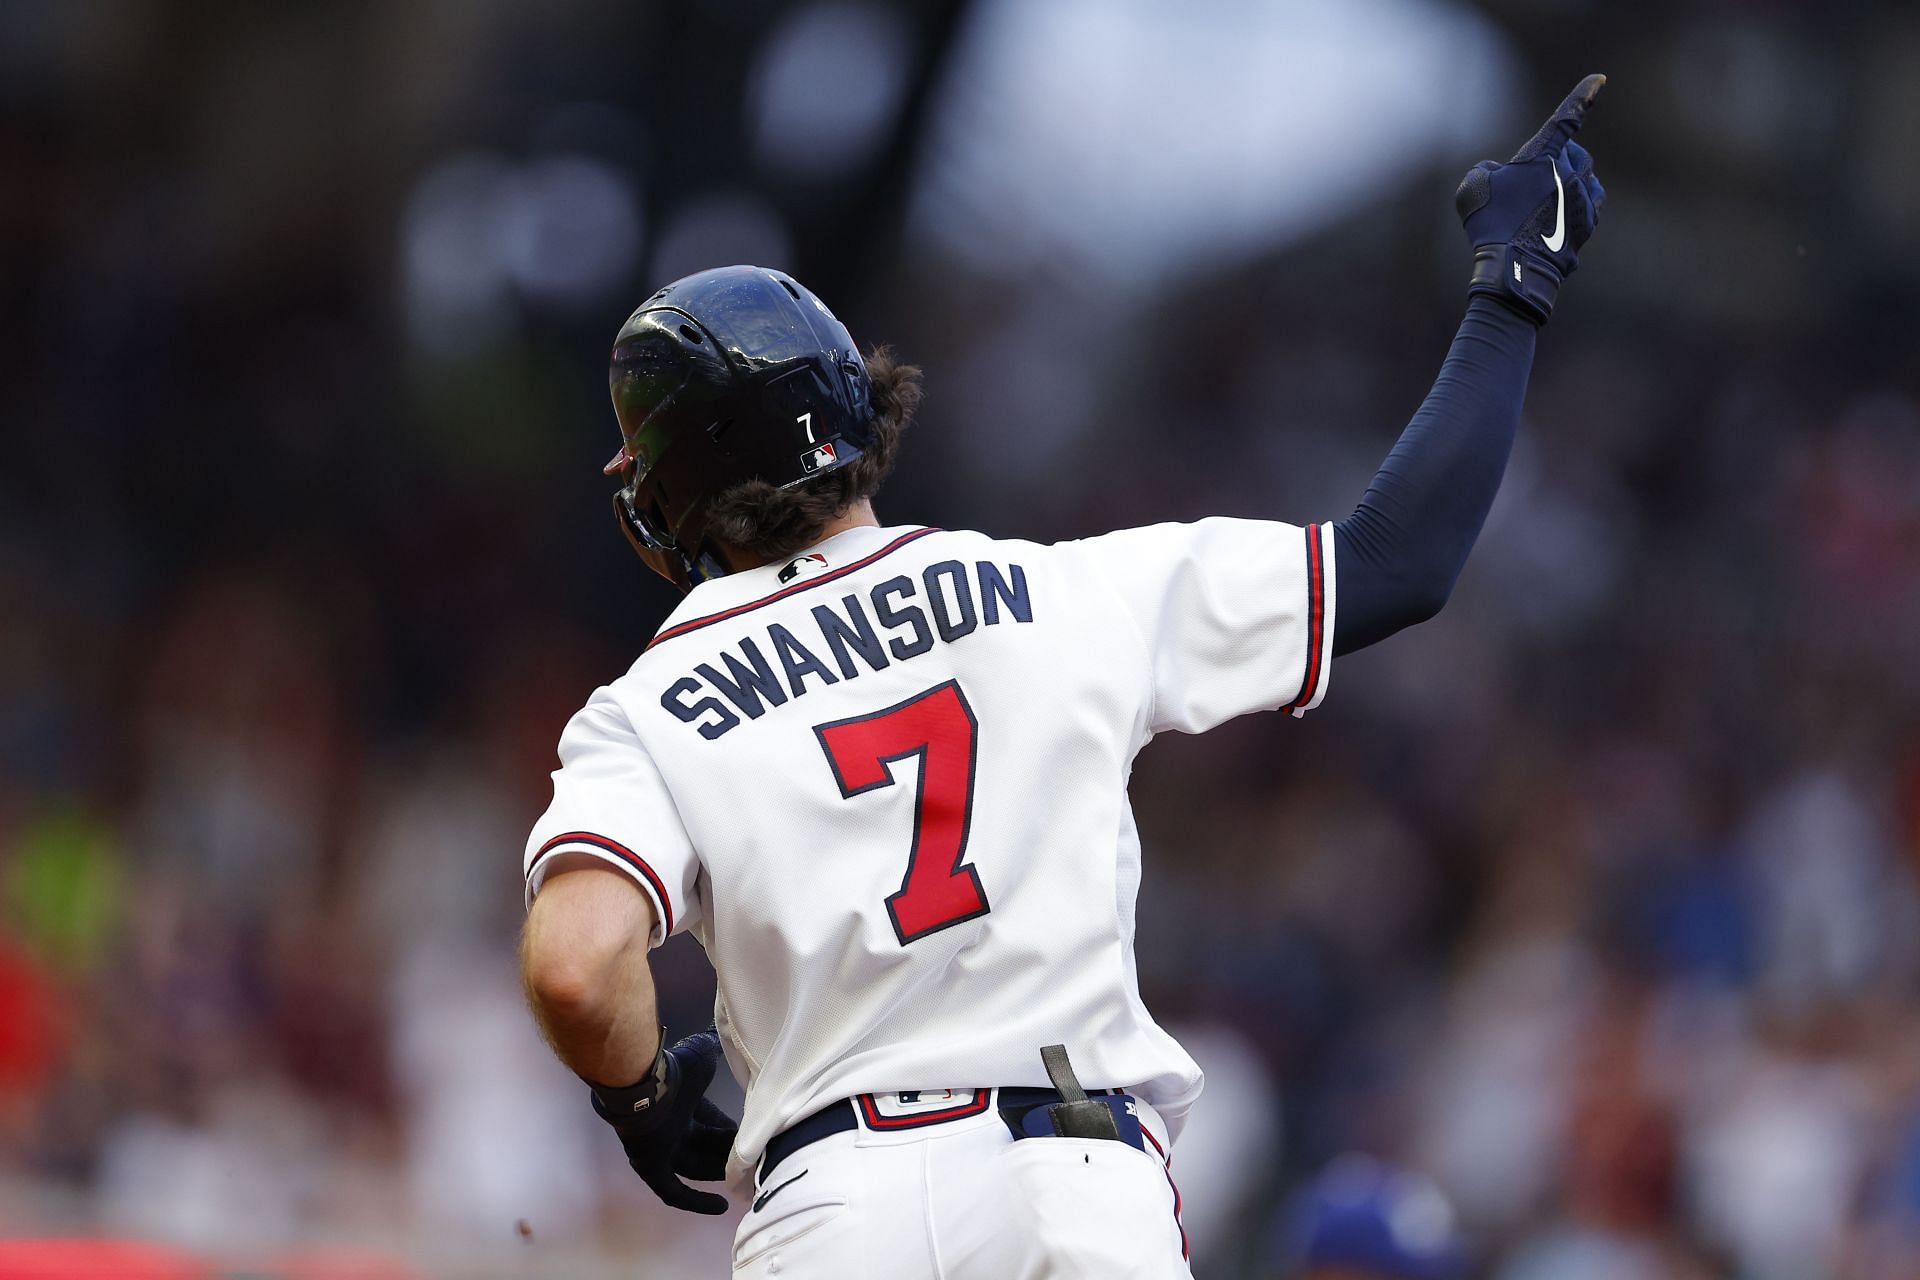 Swanson hopes to stay with Braves long term: 'This is my home